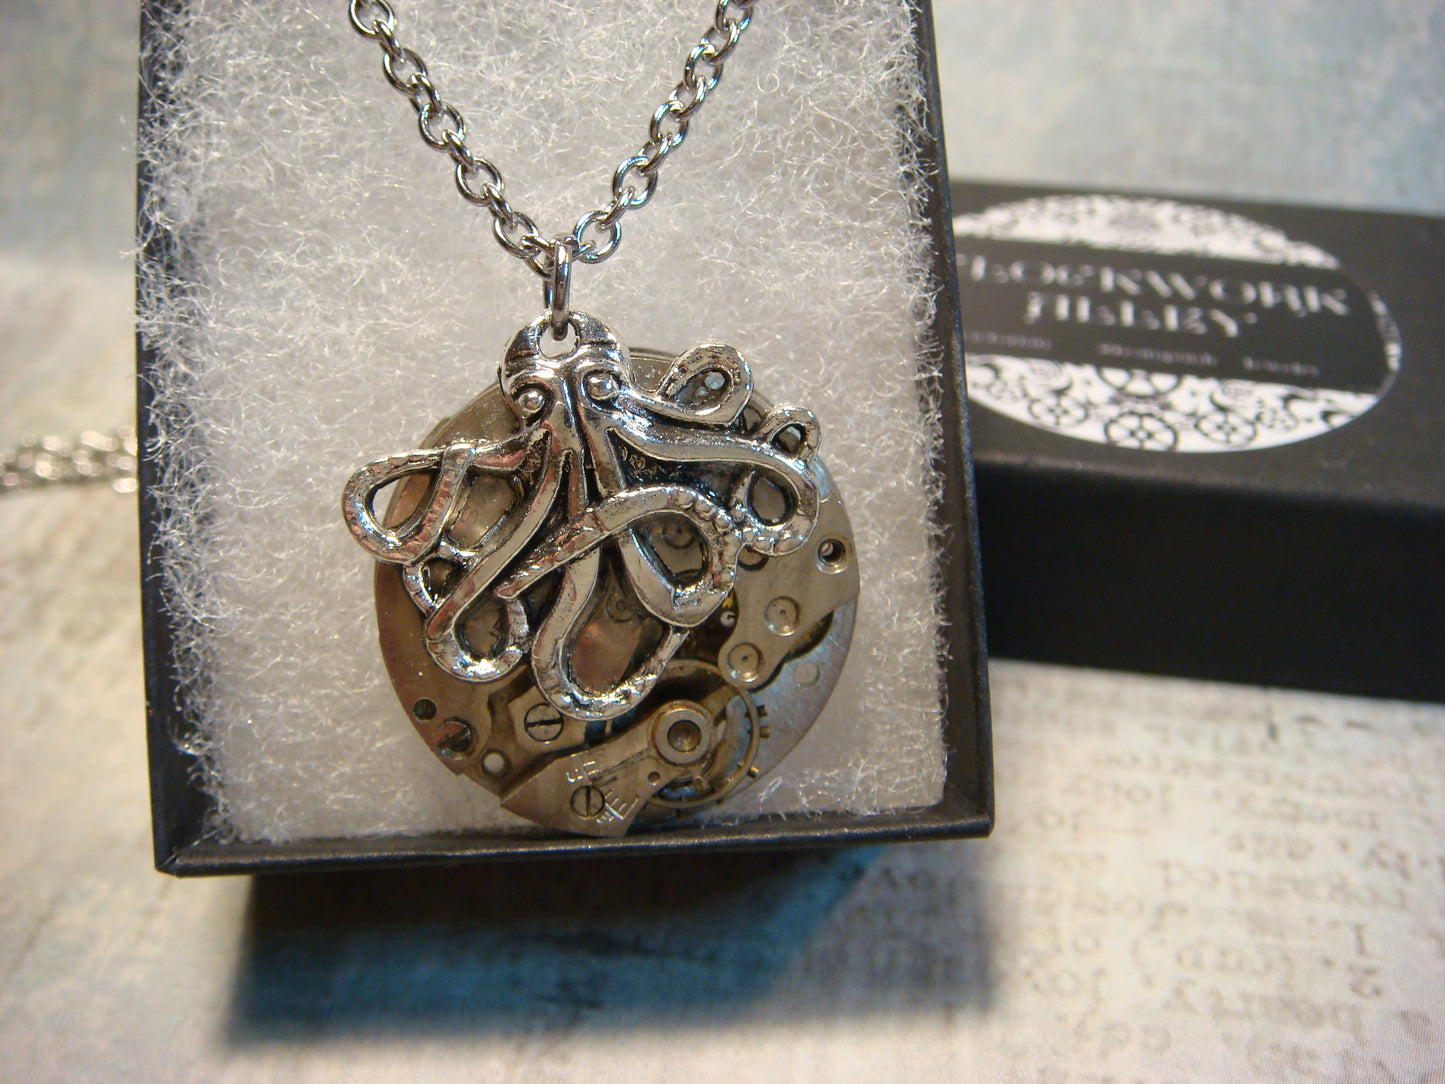 Steampunk Octopus Watch Movement Necklace with Exposed Gears